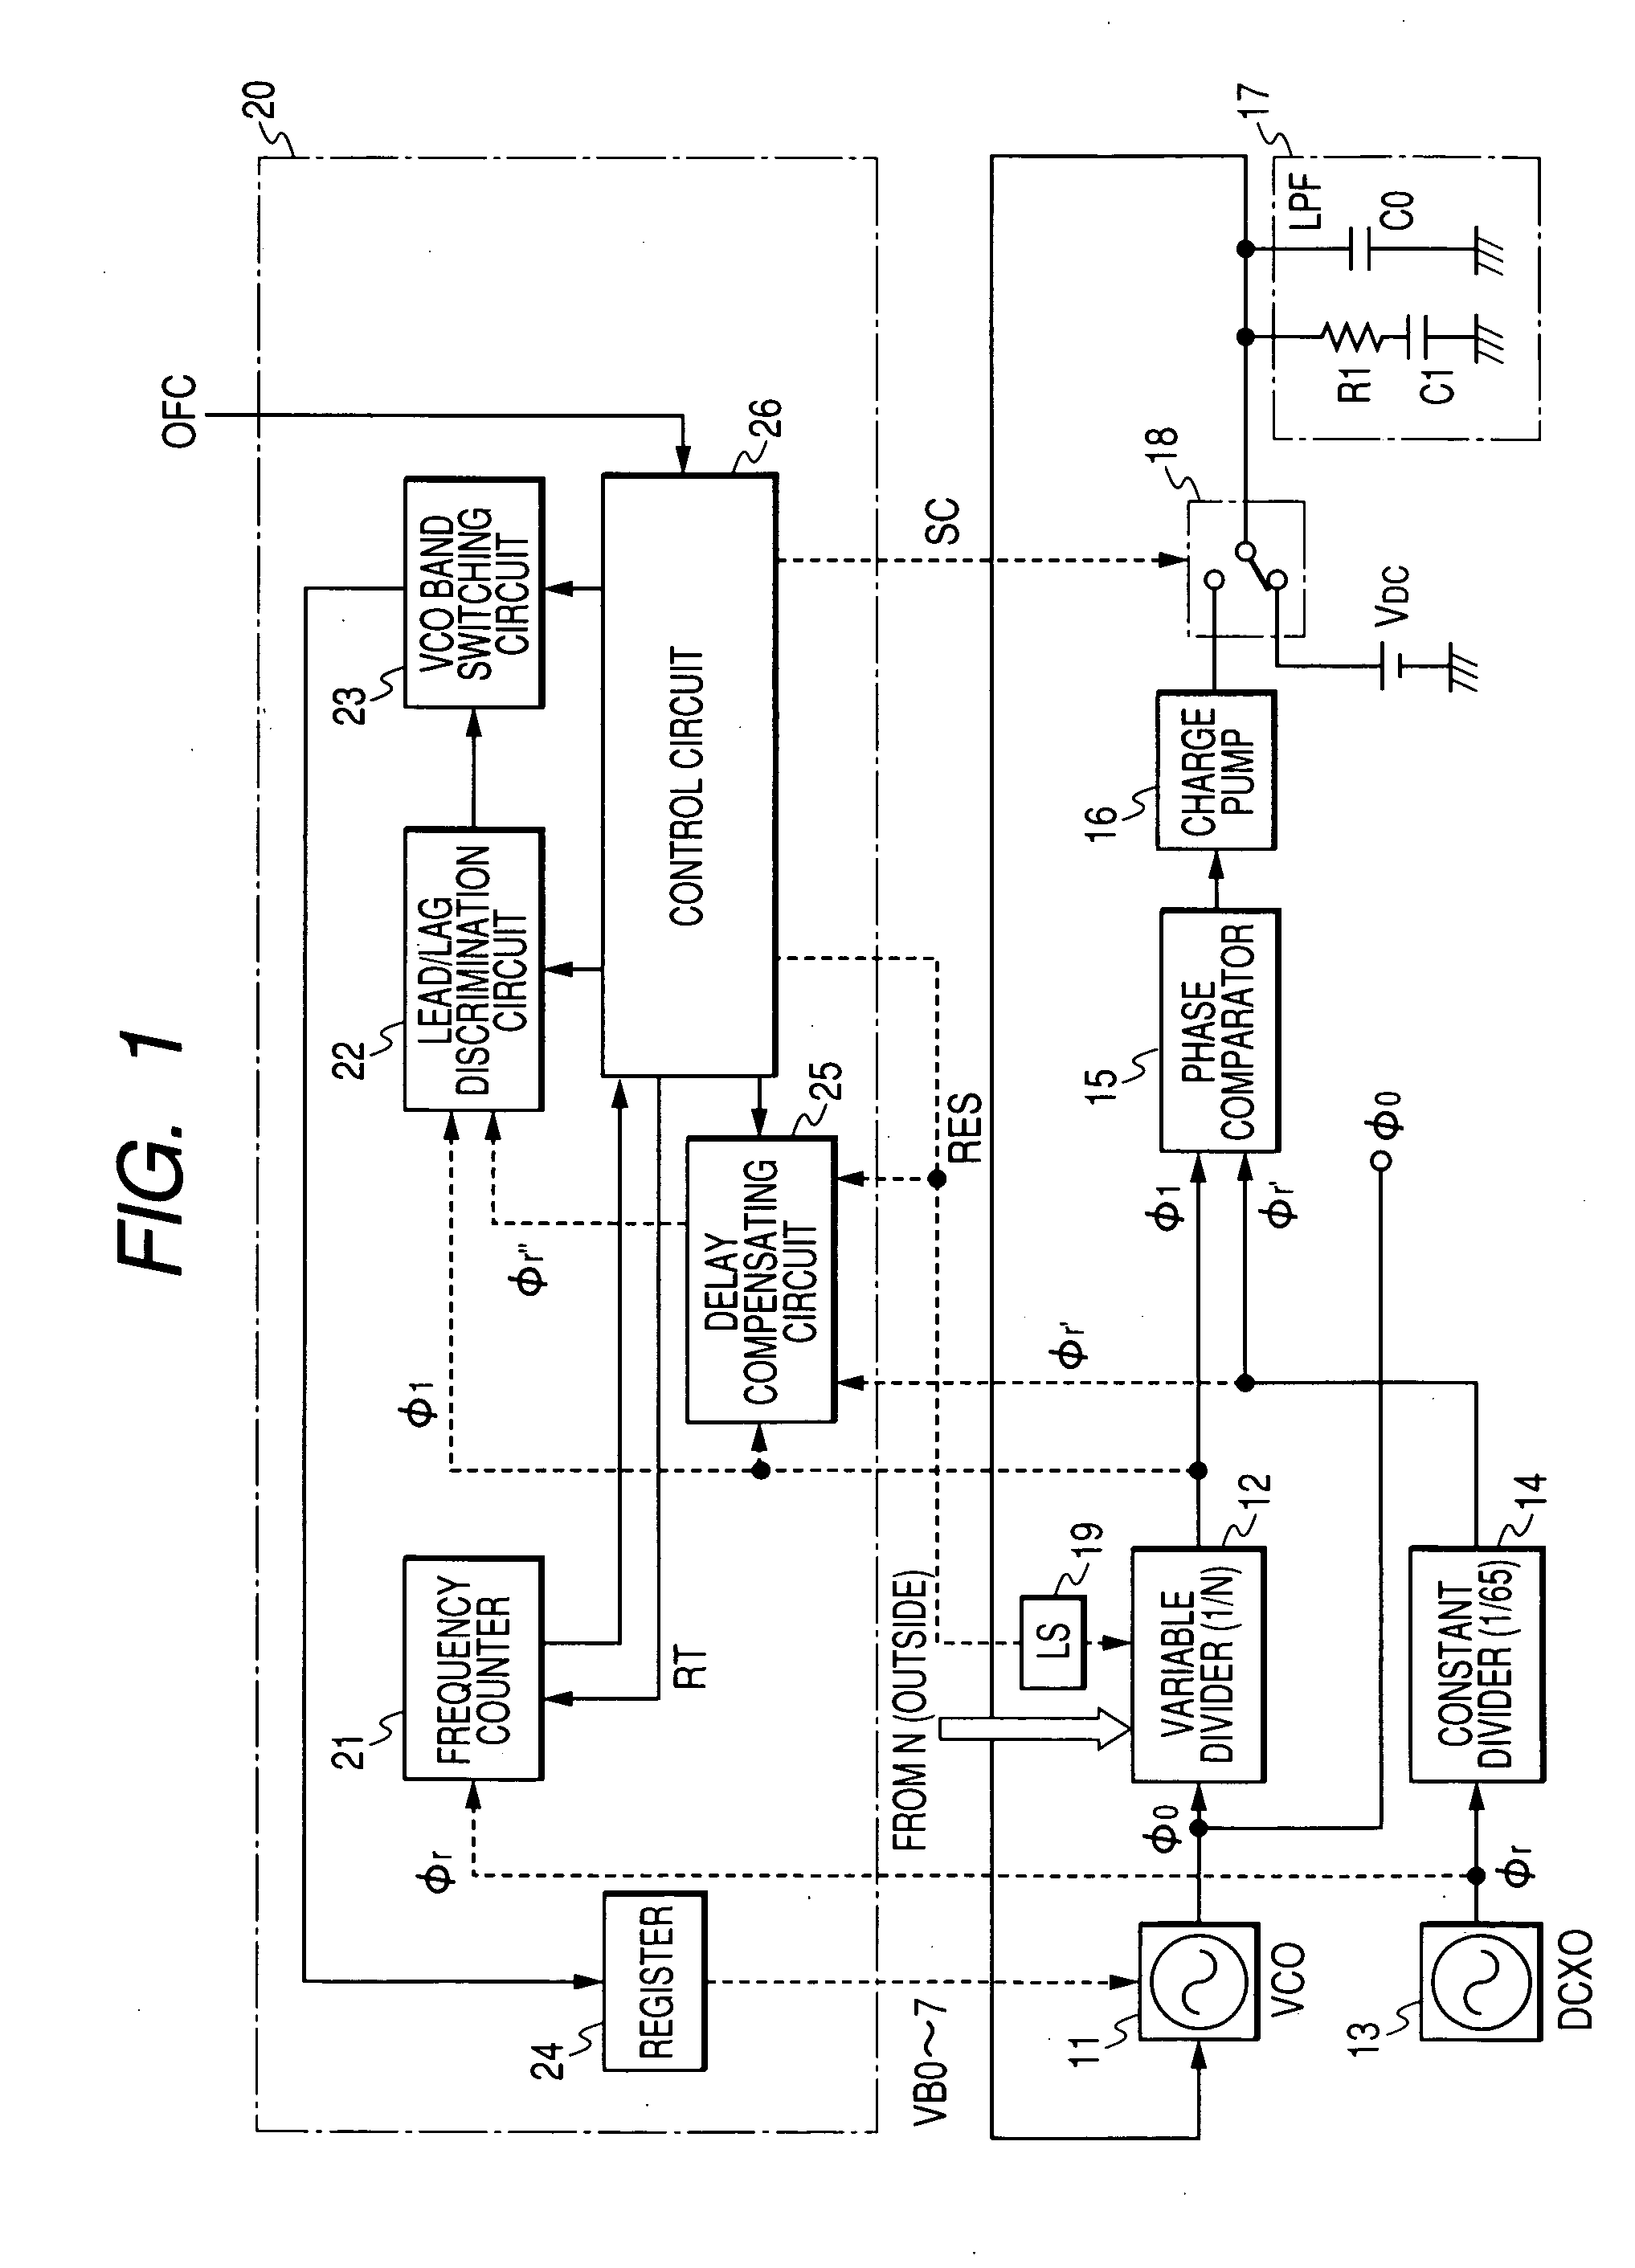 Semiconductor integrated circuit for wireless communication